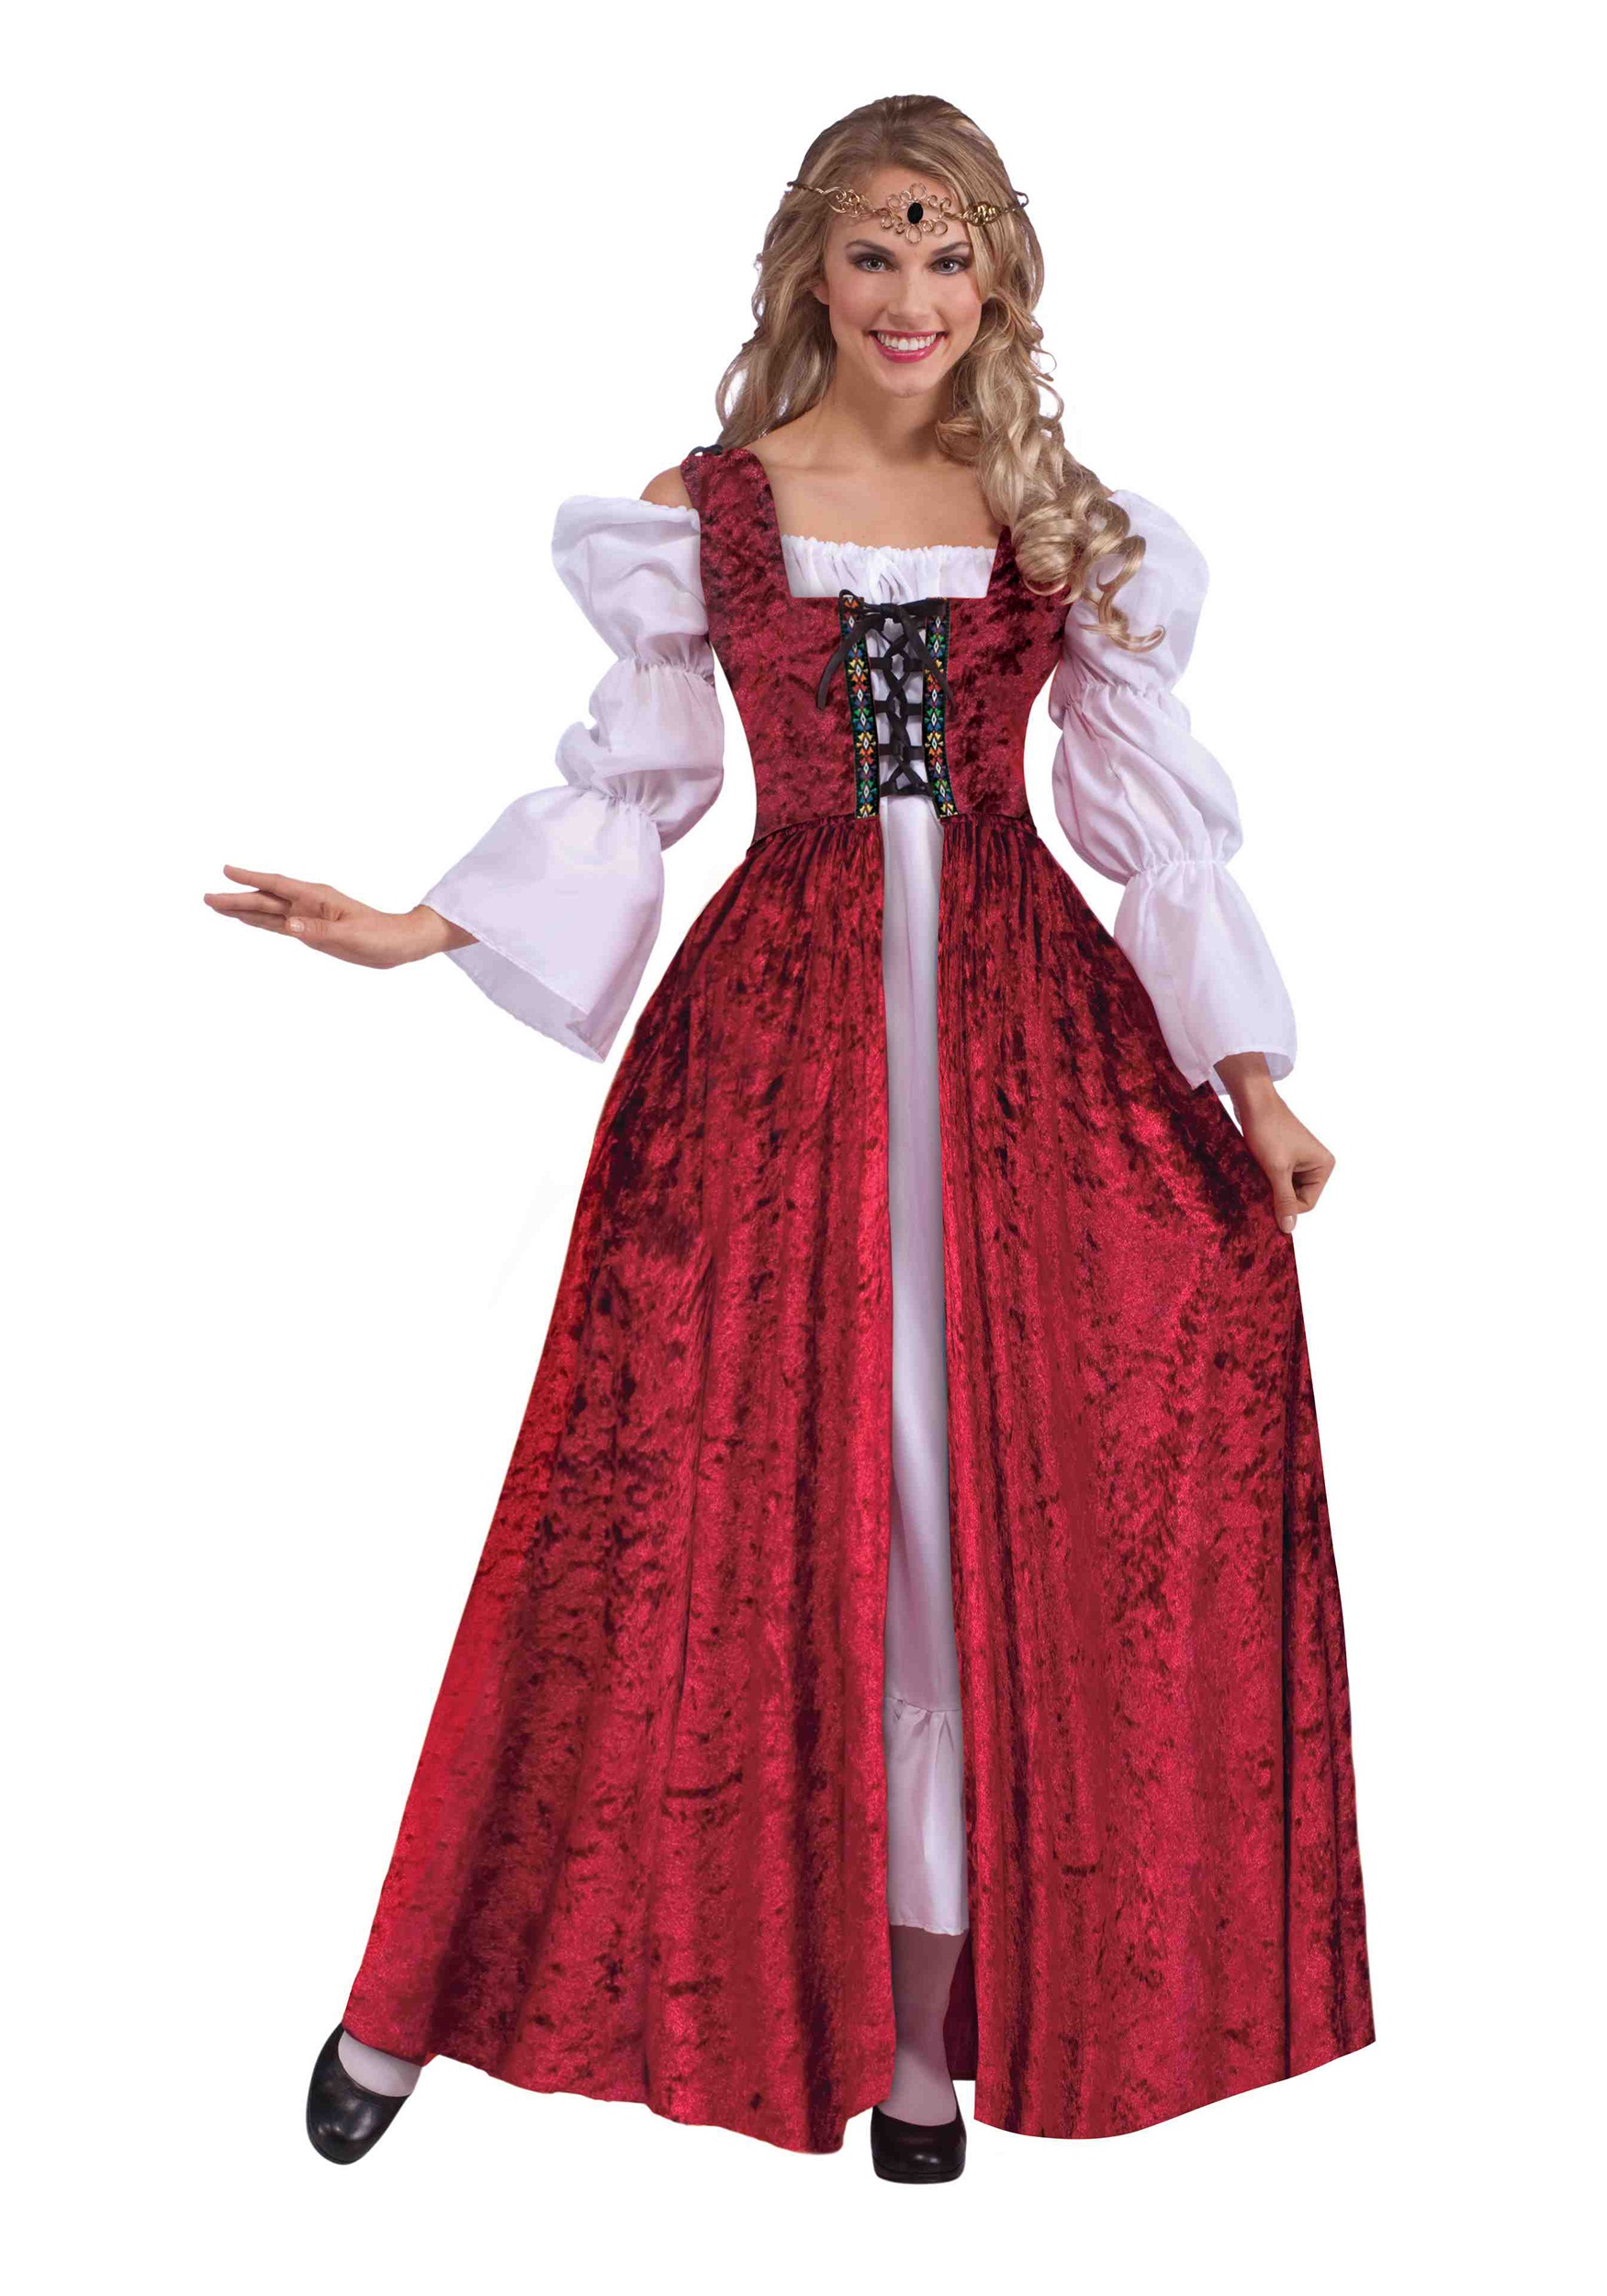 Women's Plus Size Medieval Laced Gown Costume